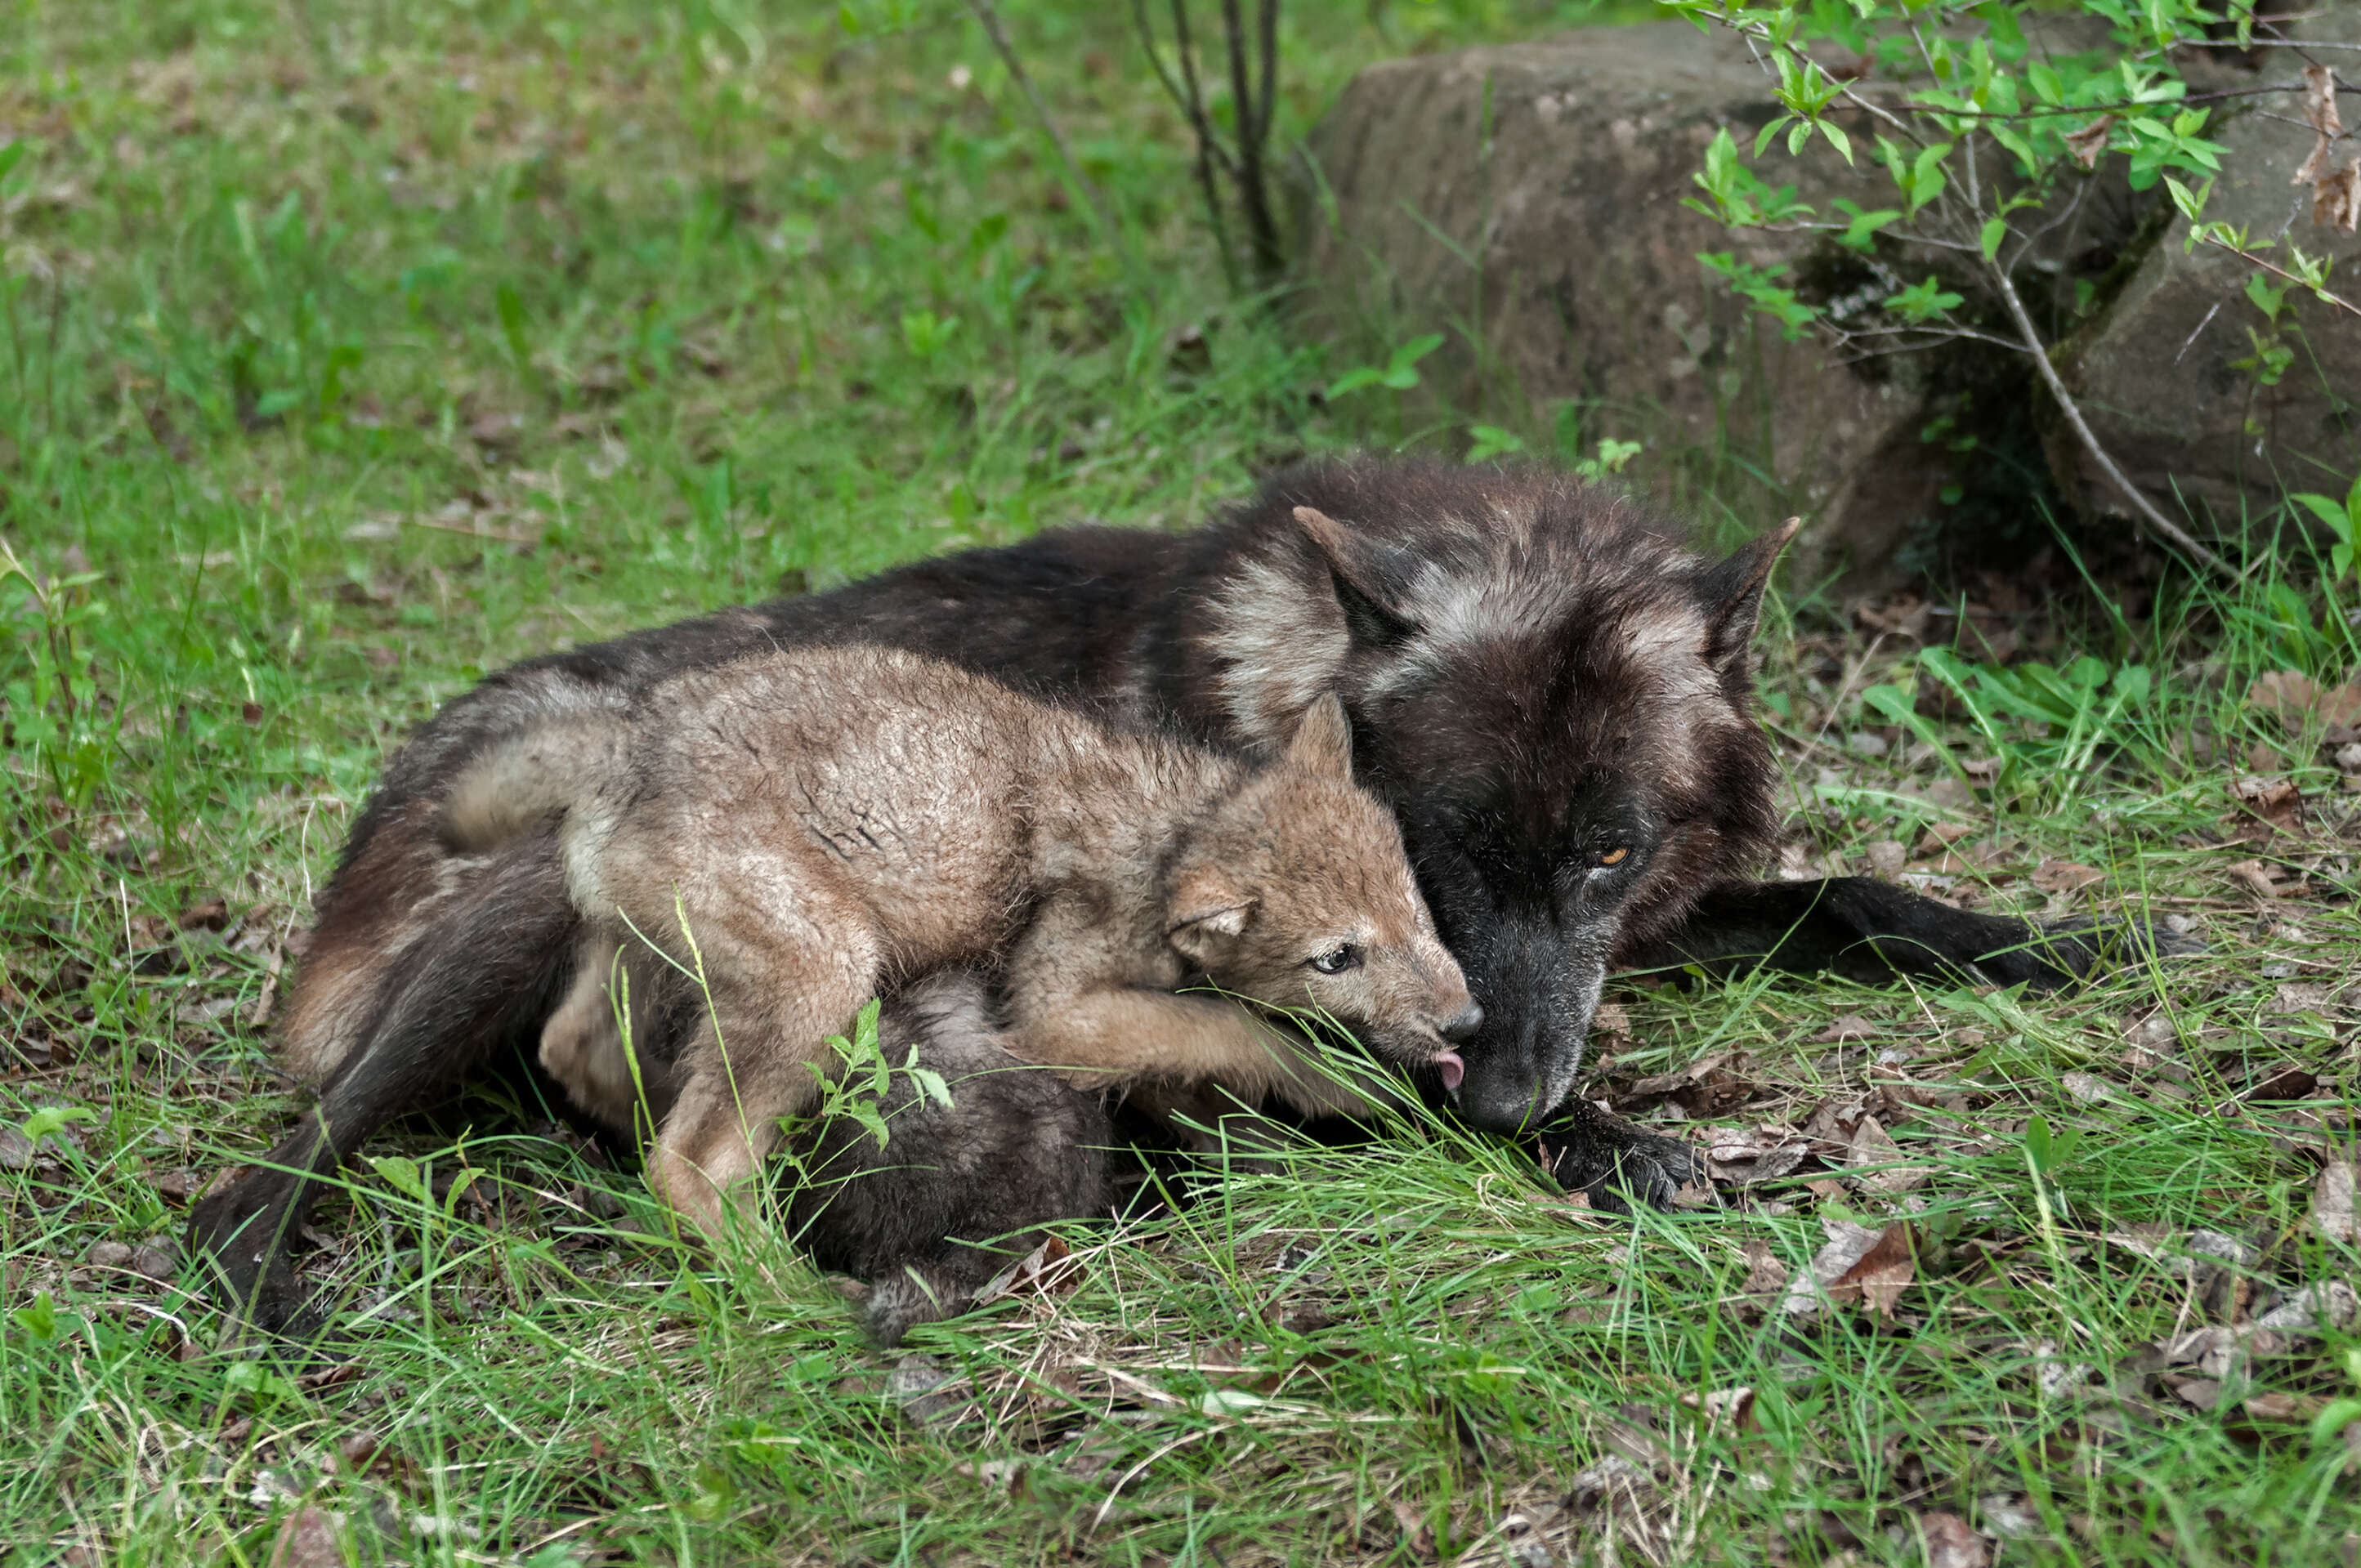 Adult gray wolf with baby